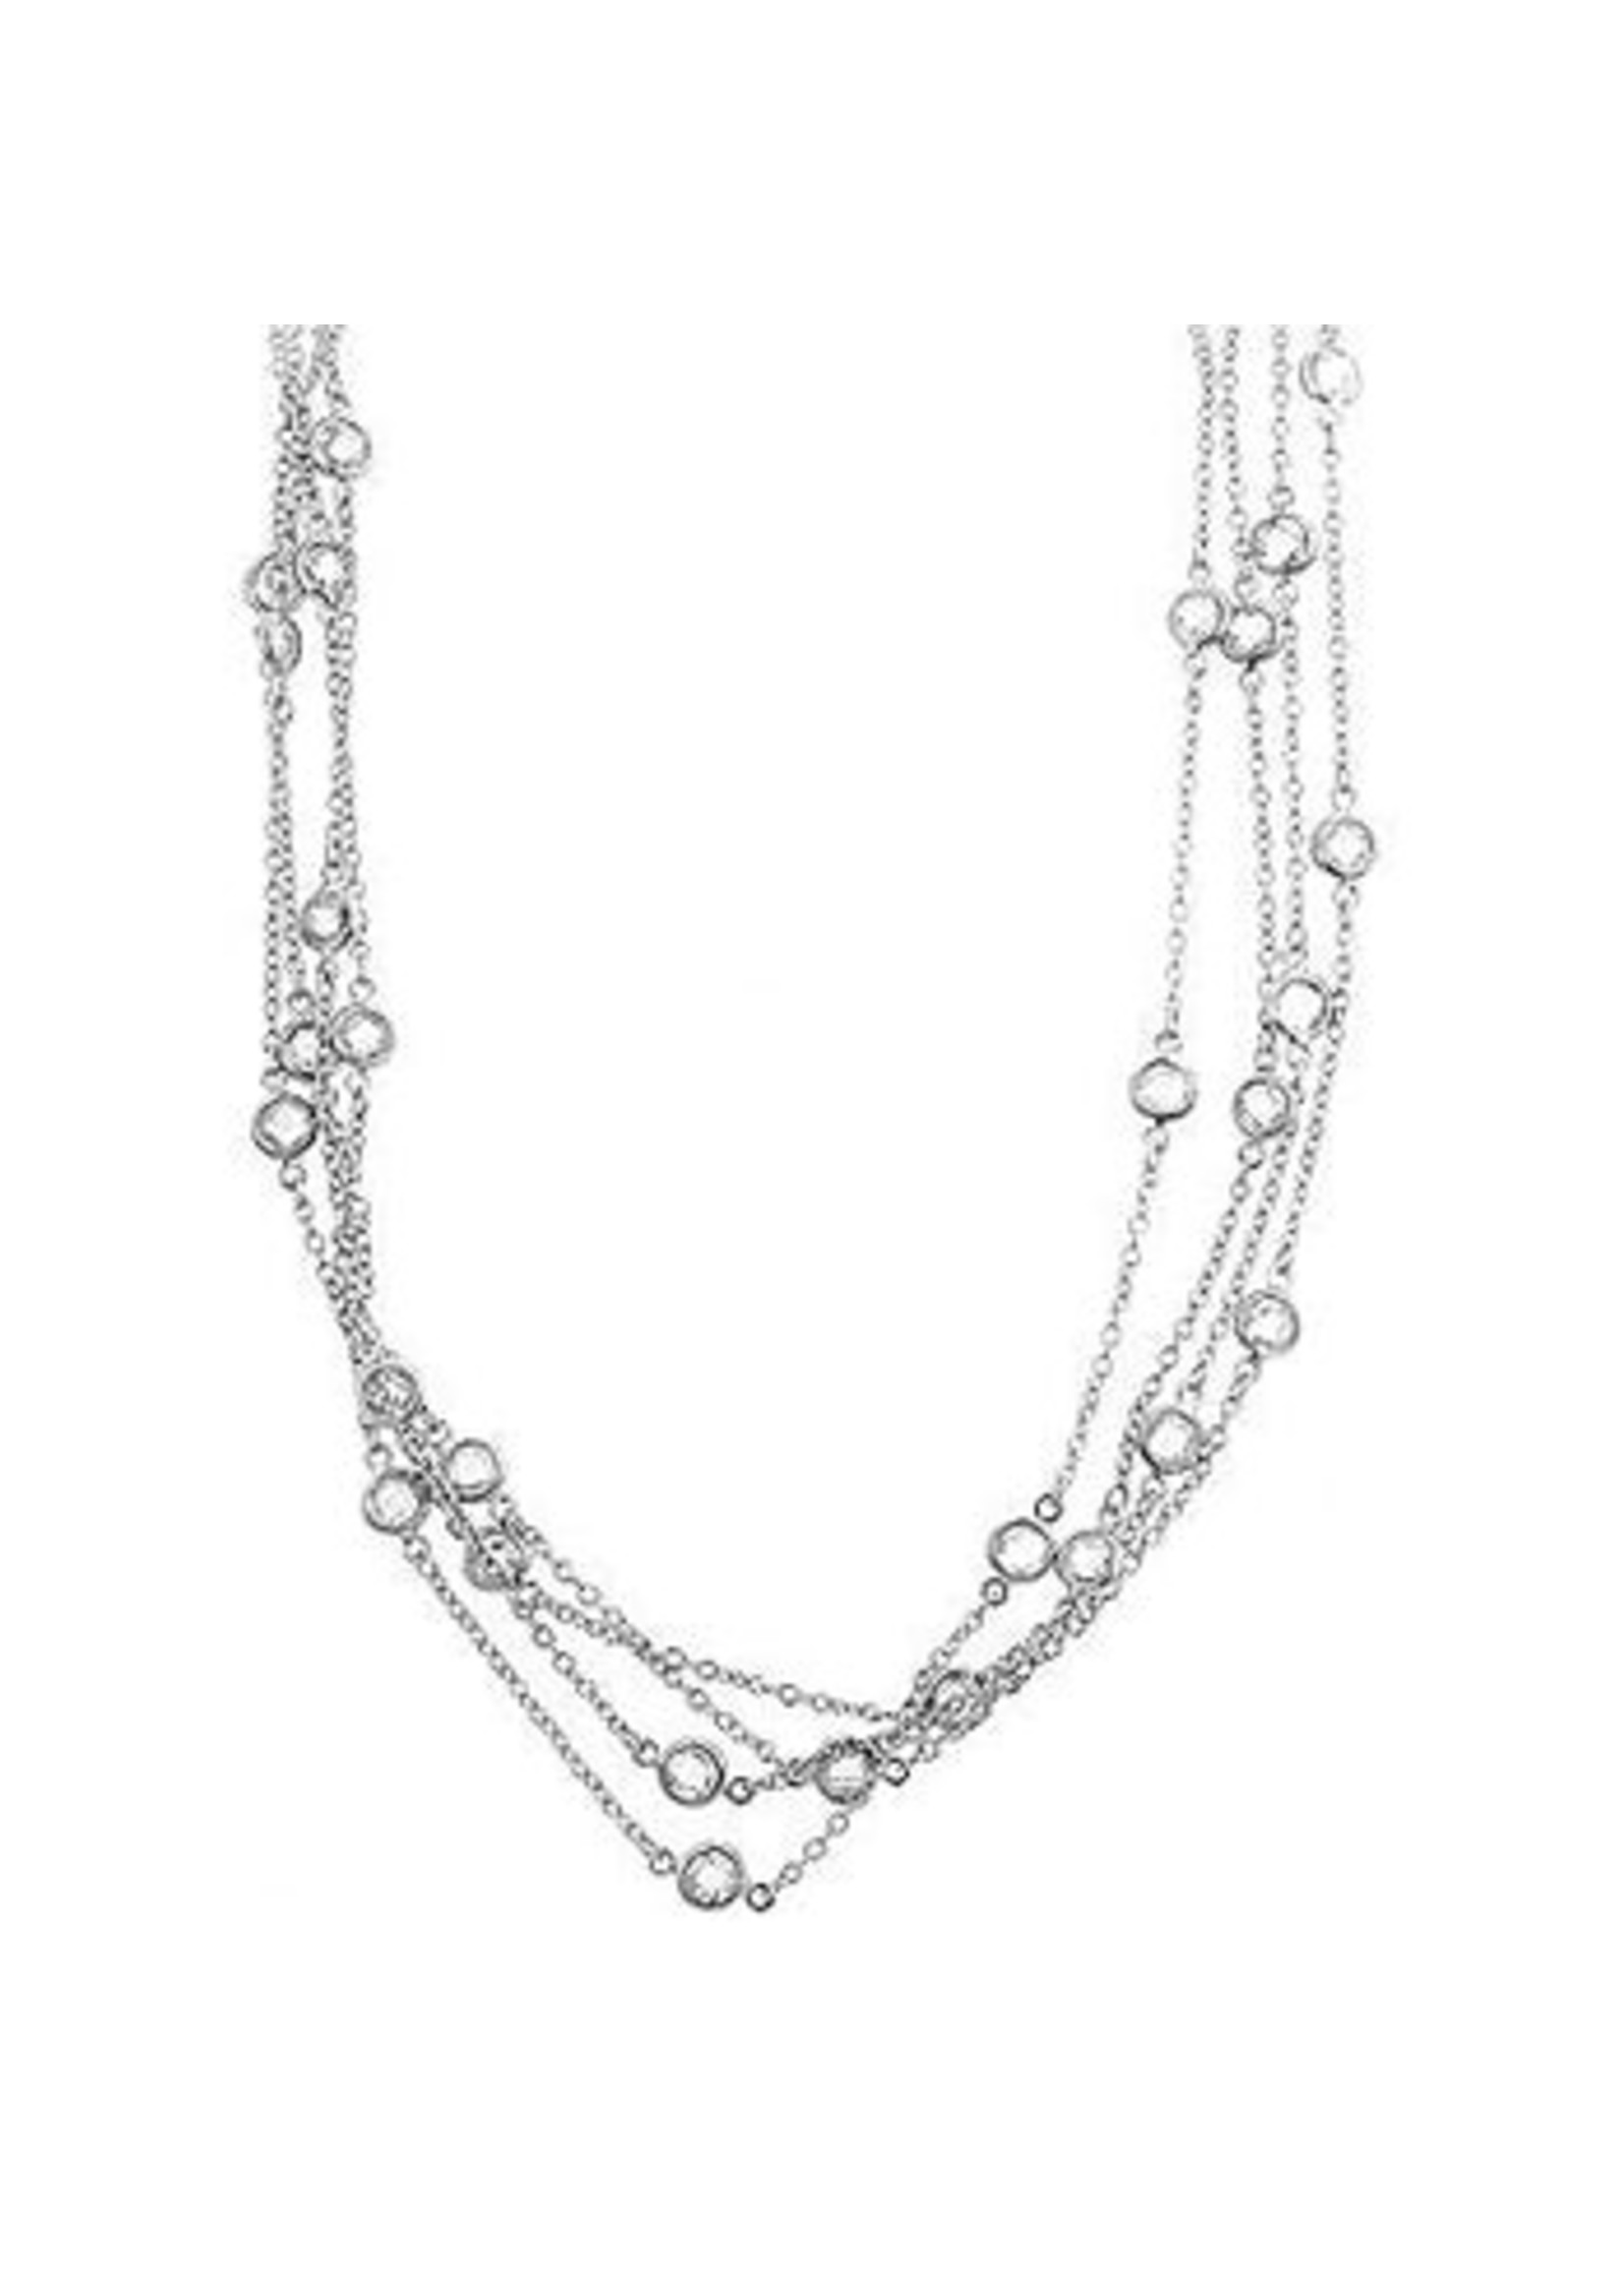 KDesign Regal Collection Layered Bezel Rhodium Plated Finish Necklace